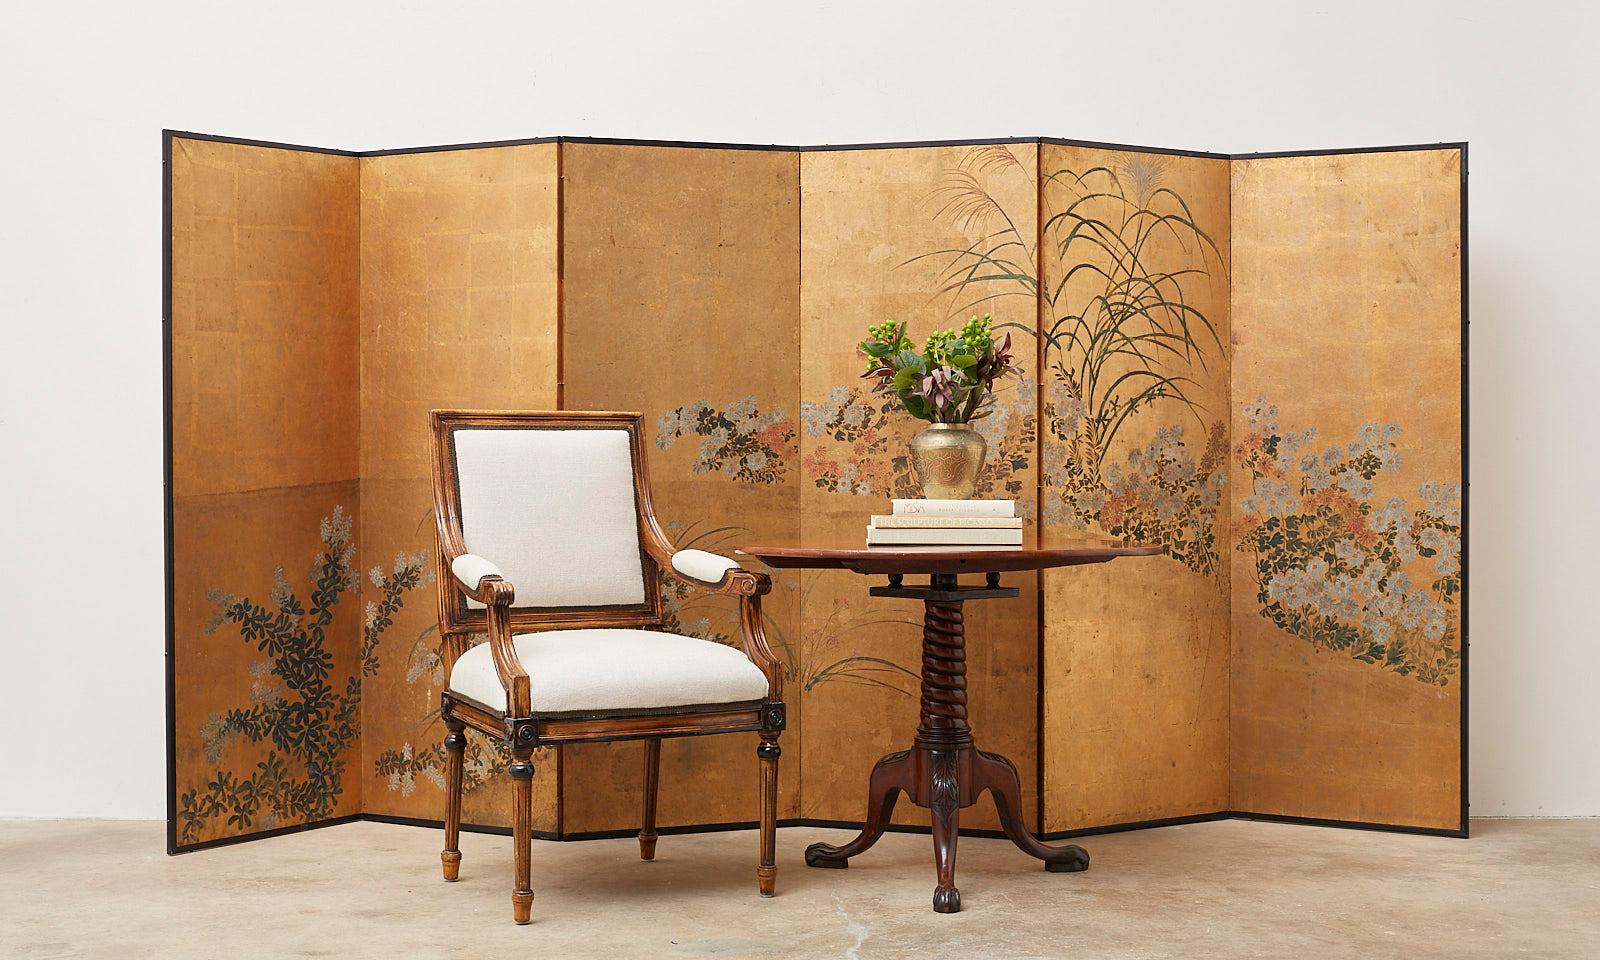 Impressive Japanese six-panel Meiji period screen made in the Rinpa school style after Tawaraya Sosetsu (1570-1640). Depicting autumn flowers, plants, and grasses of bush clover, chrysanthemum, and pampas grass (hagi, kiku, and obana). Ink and color